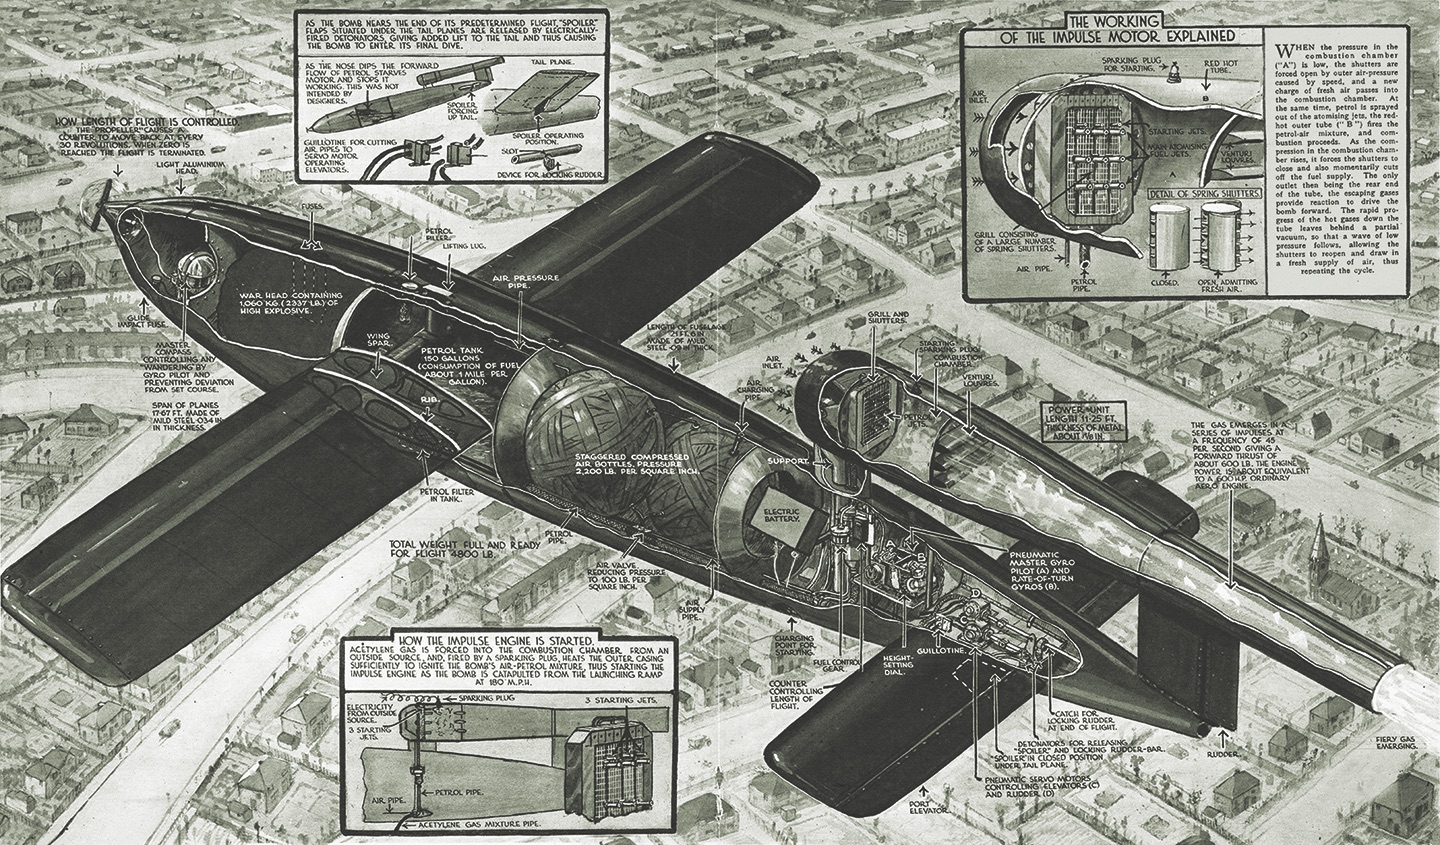 The Nazis’ vaunted “vengeance weapon,” the V-1 missile.